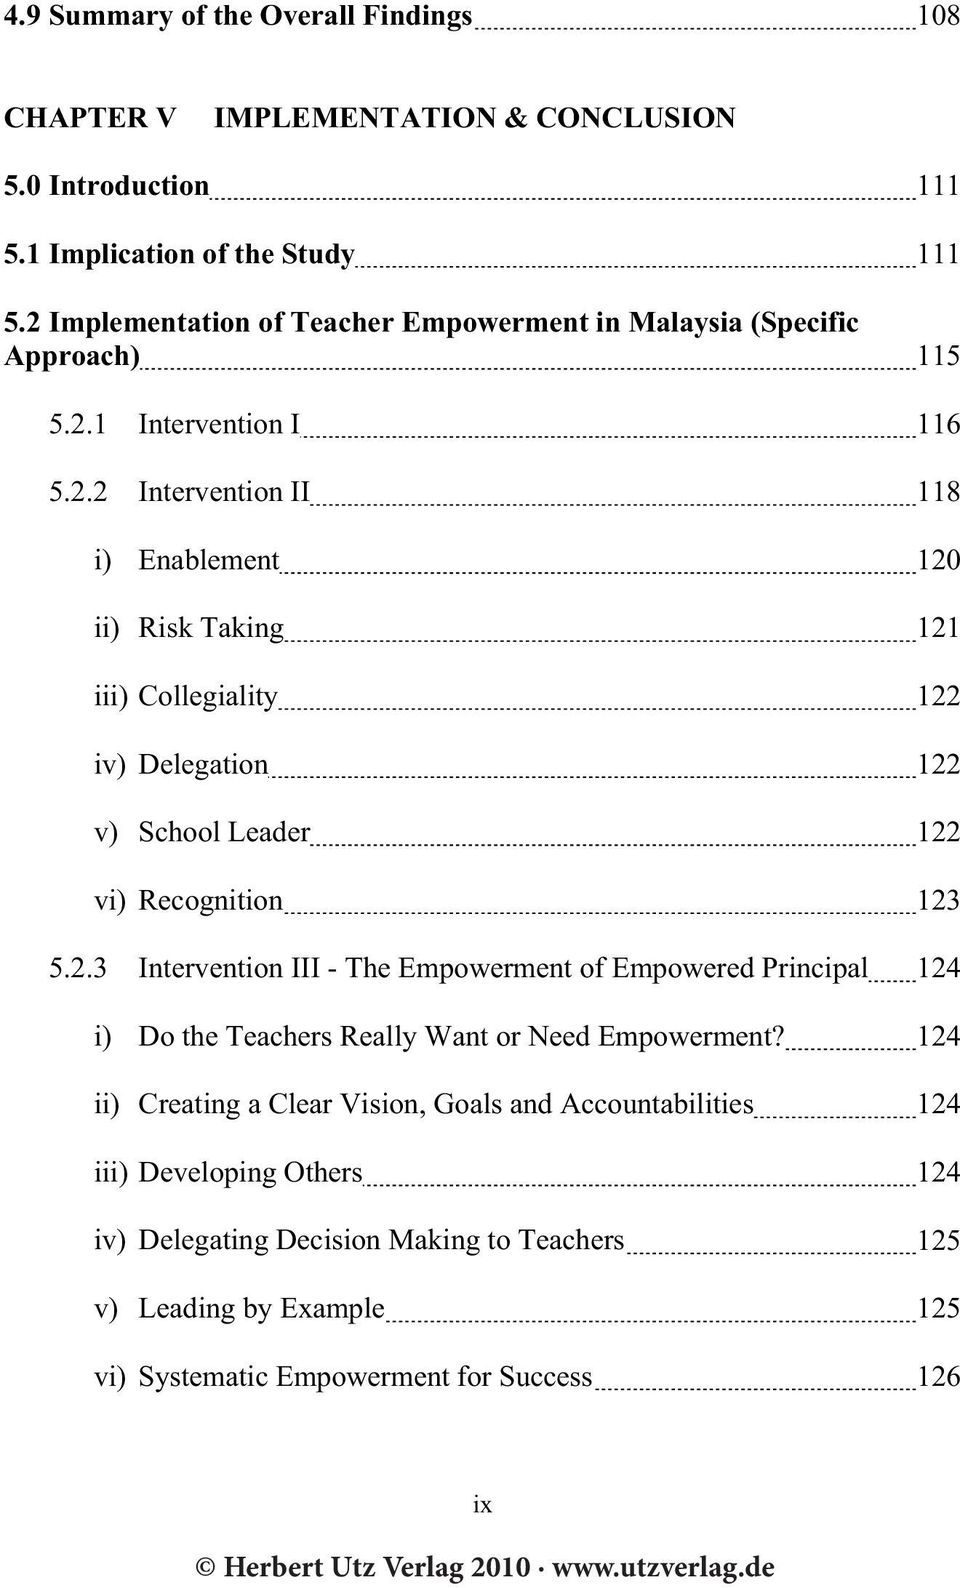 2.3 Intervention III - The Empowerment of Empowered Principal 124 i) Do the Teachers Really Want or Need Empowerment?